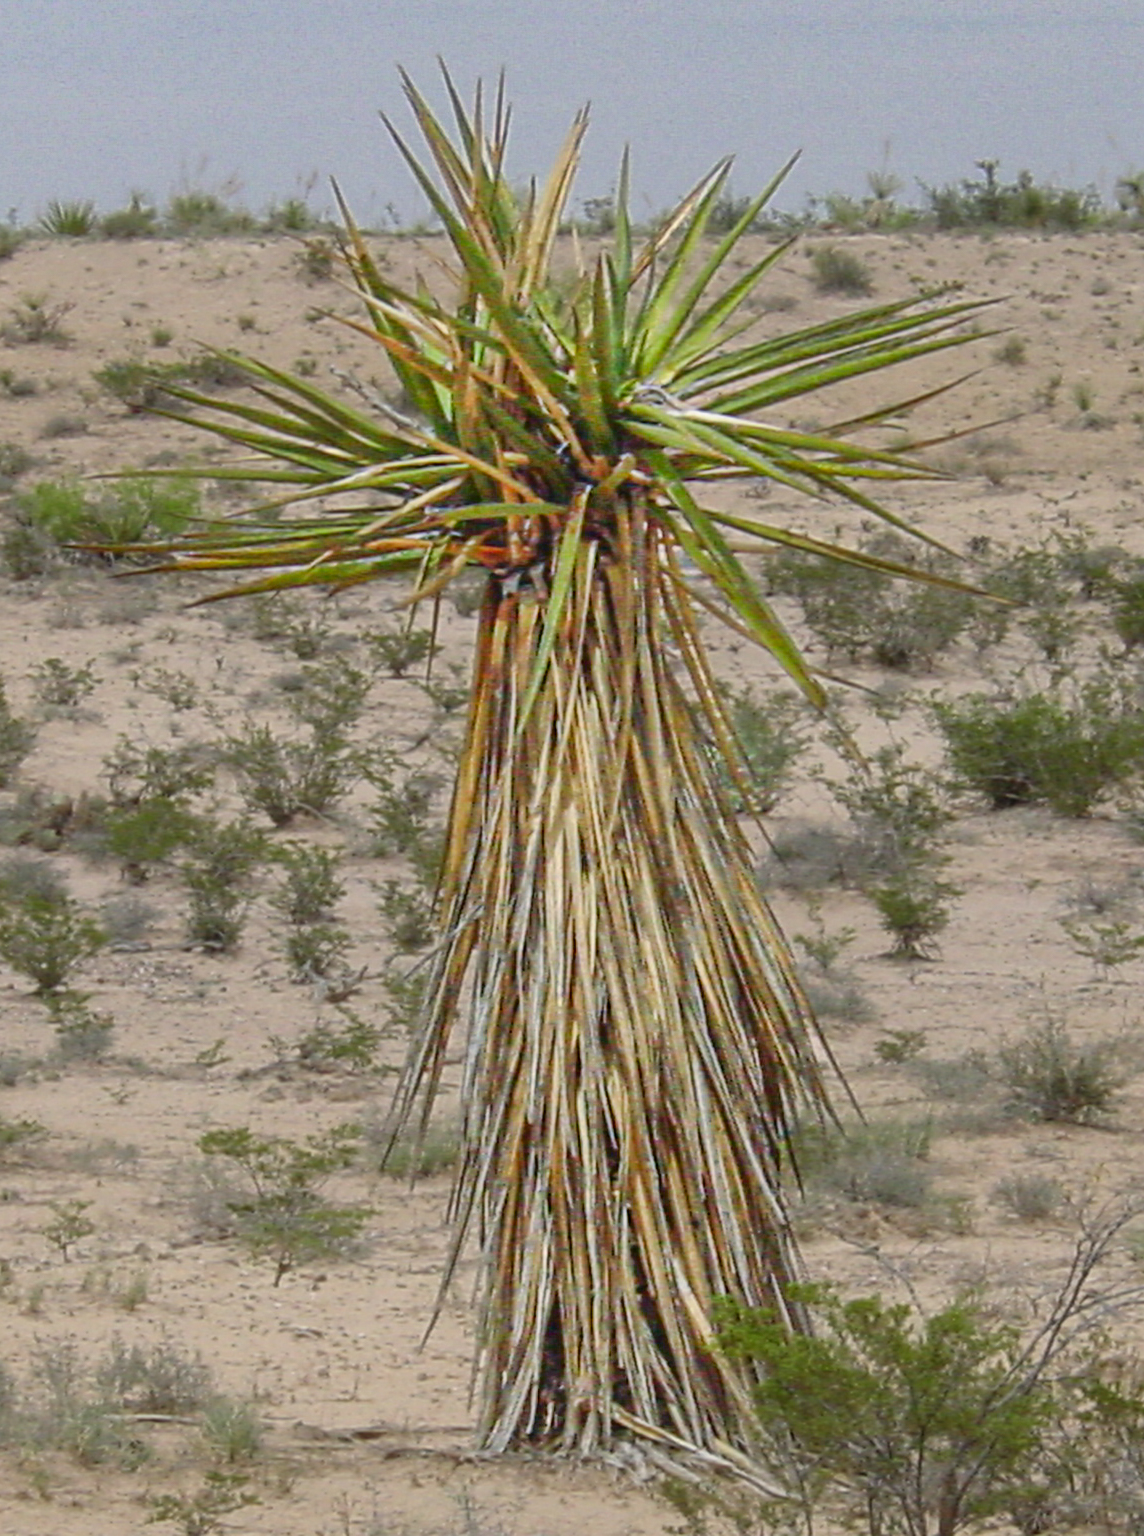 A yucca tree in a desert setting